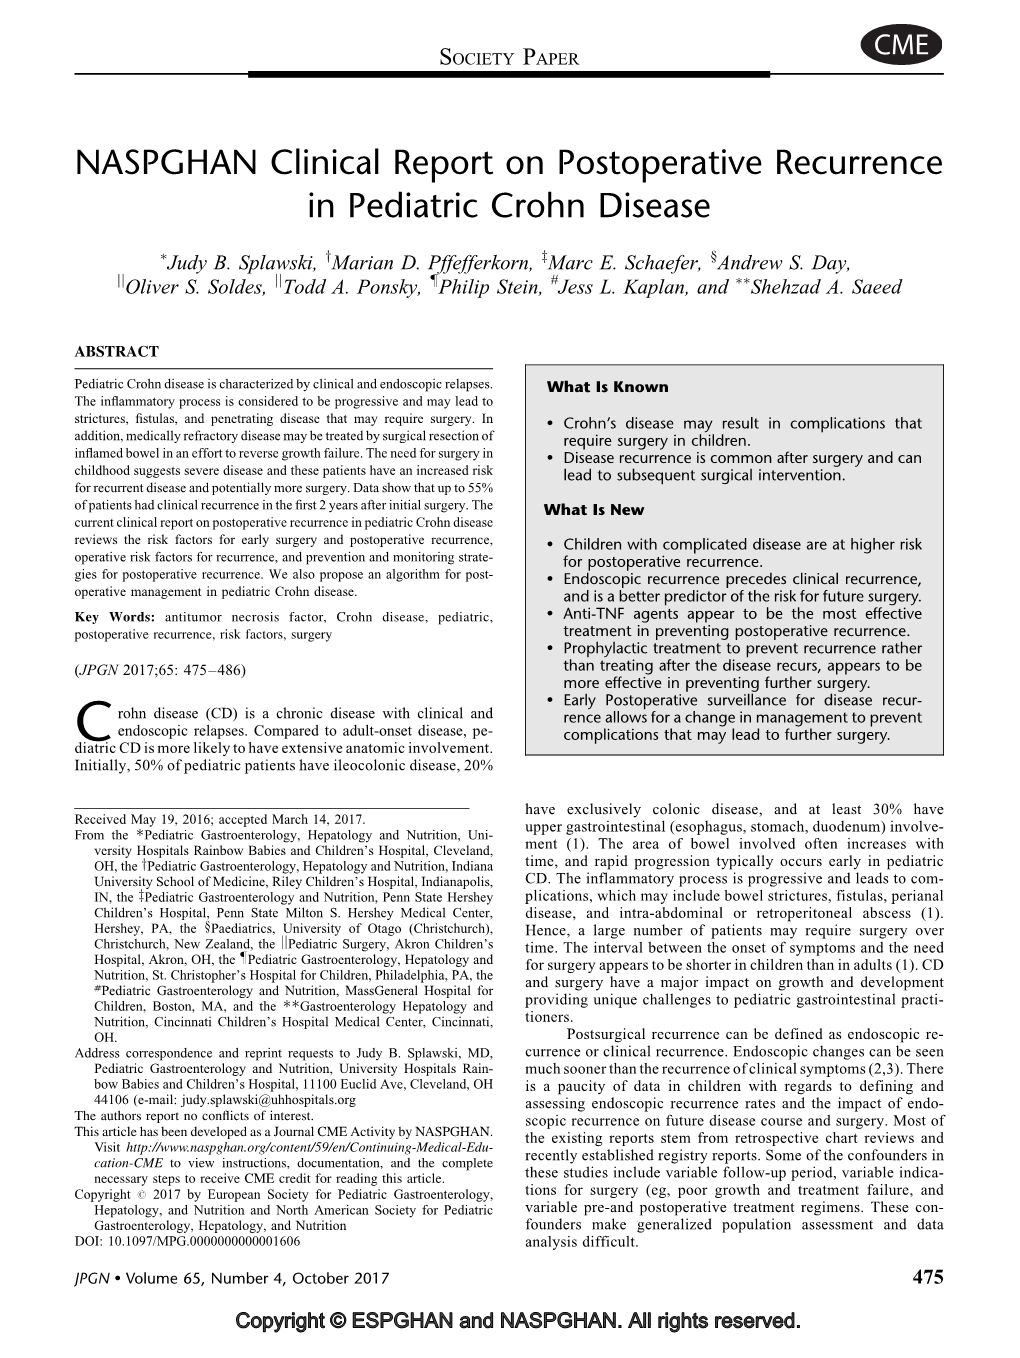 NASPGHAN Clinical Report on Postoperative Recurrence in Pediatric Crohn Disease